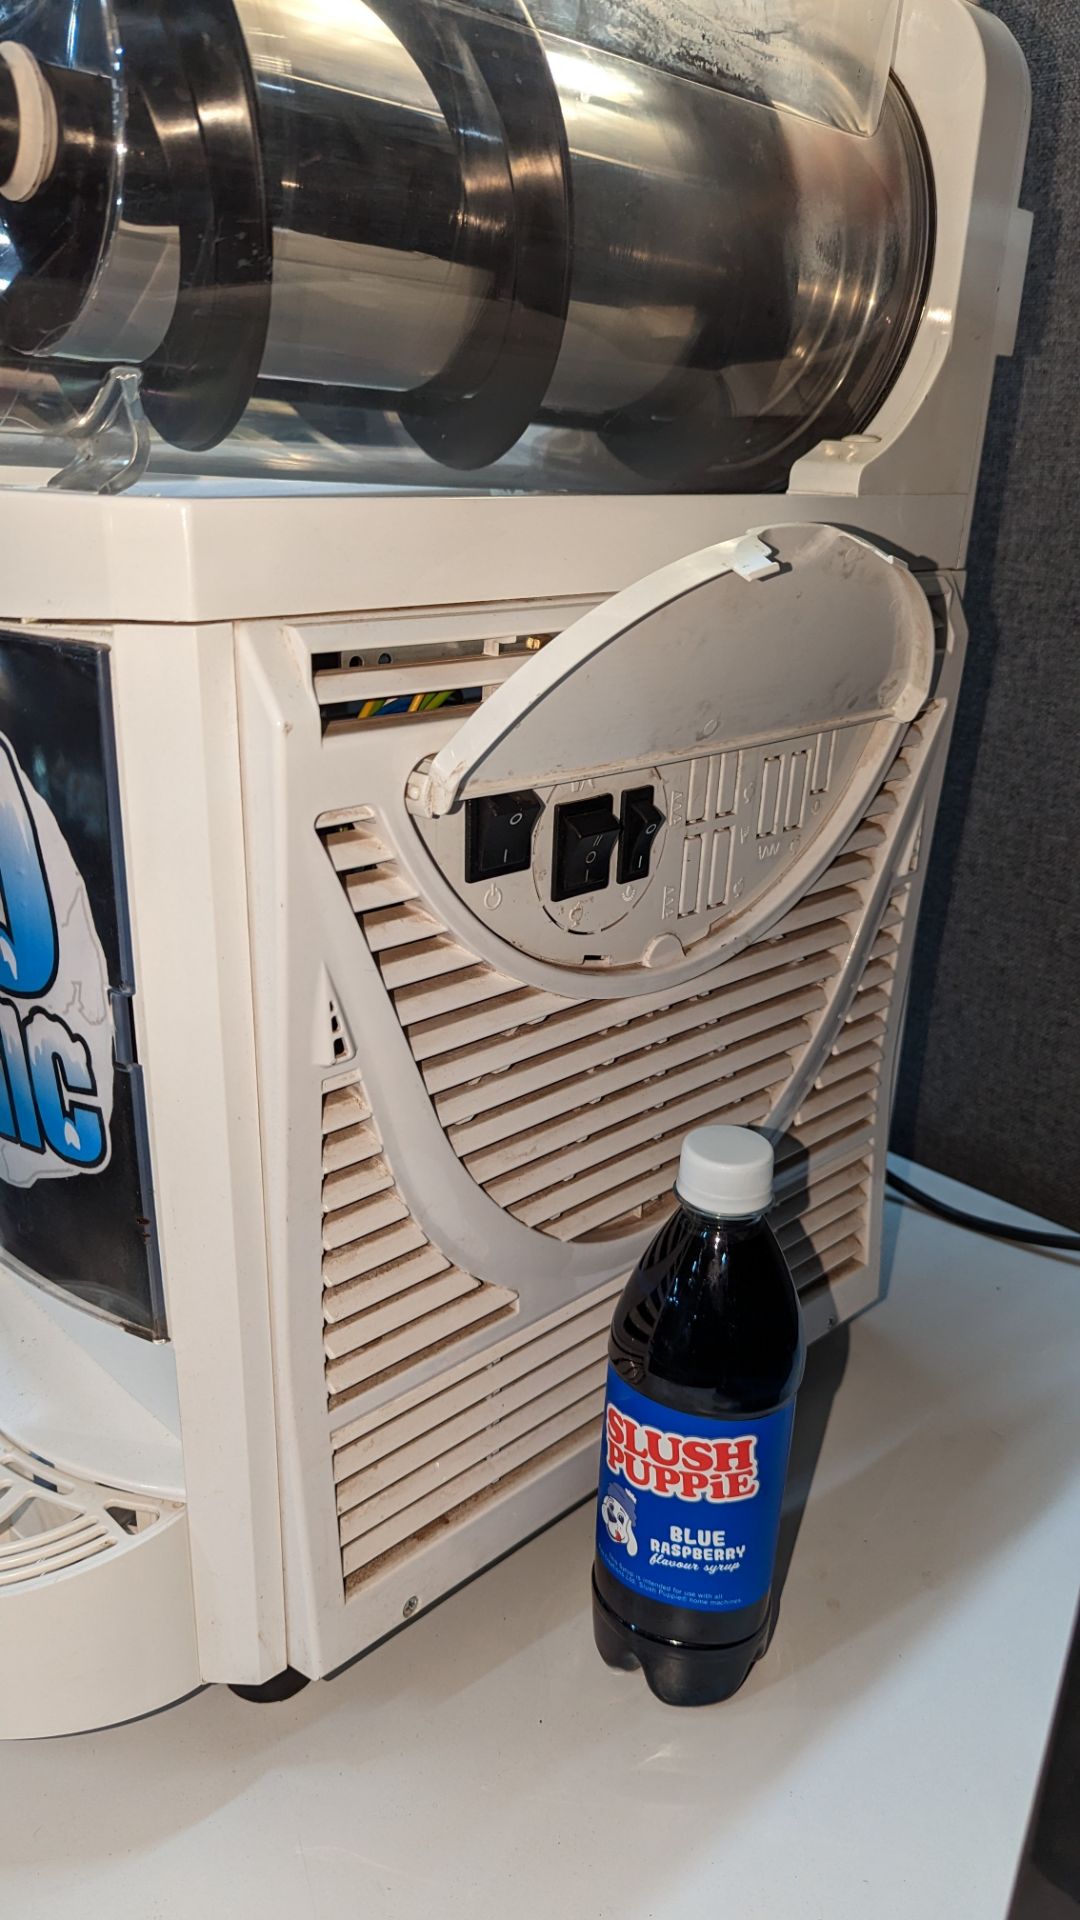 2019 slush drink machine, branded Iceotonic. We cannot find a date of manufacture plaque on the mac - Image 6 of 8